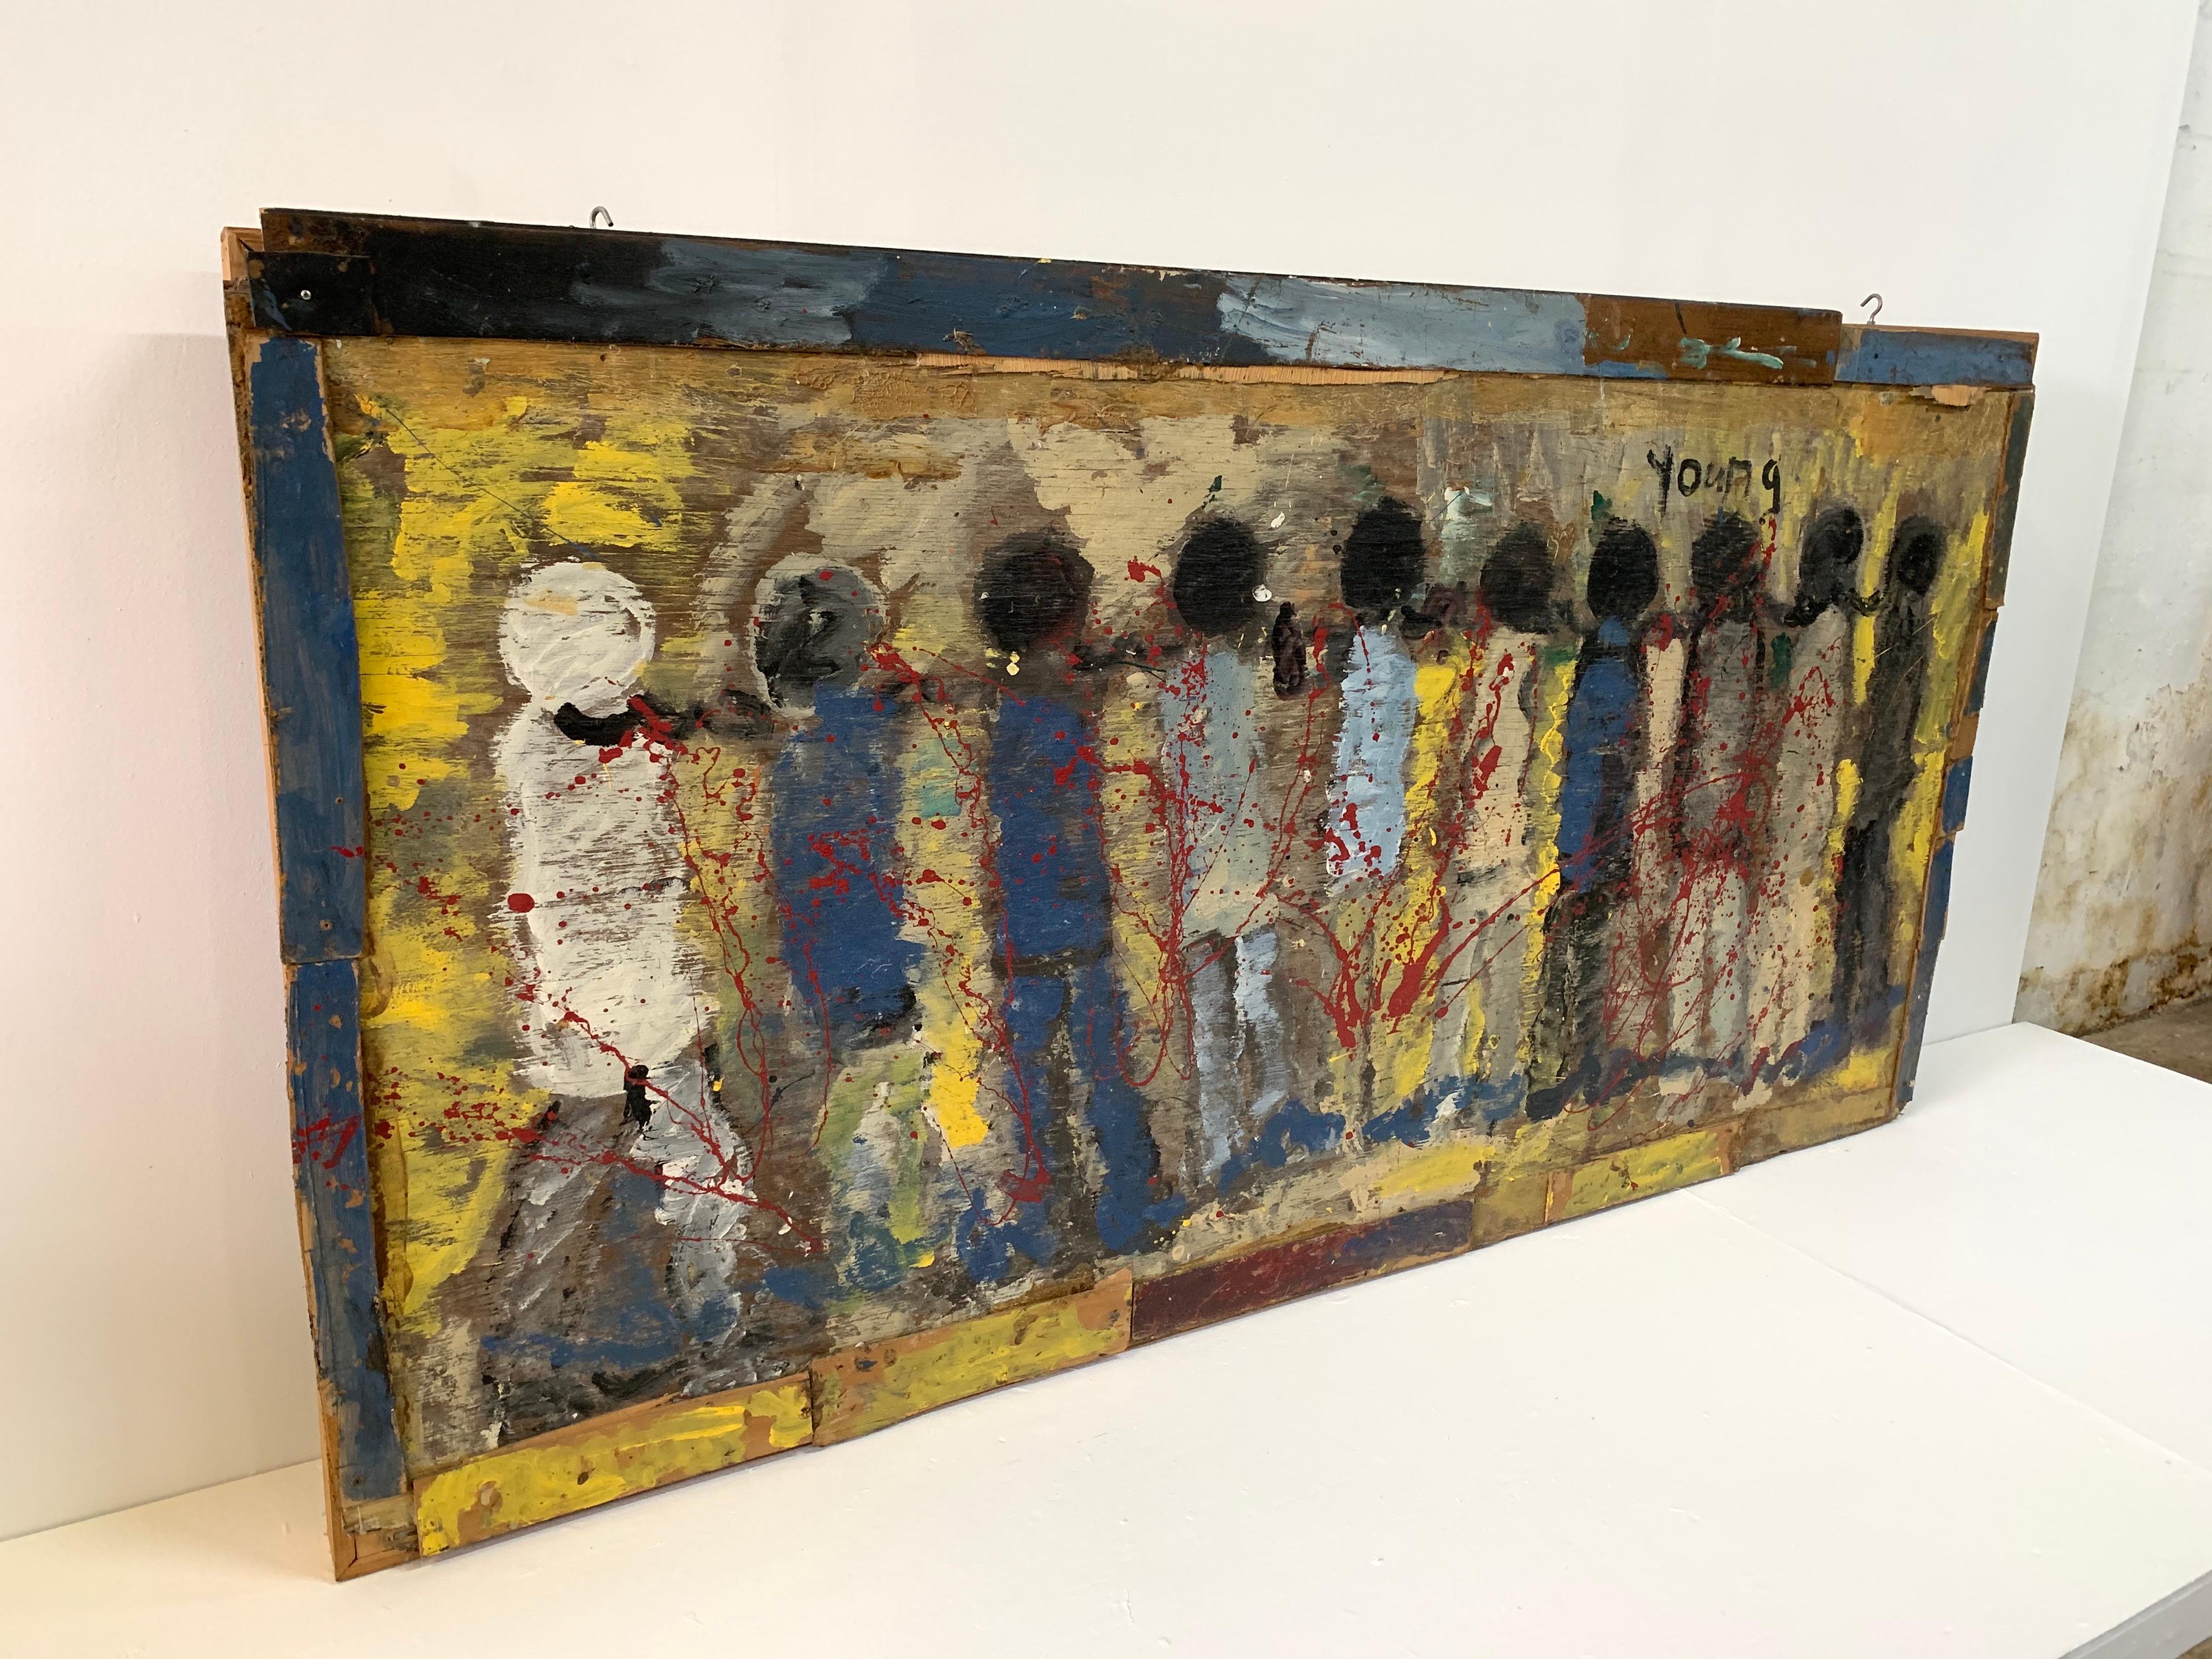 Abstract mixed-media work by artist Purvis Young. Folk Art portraying a very powerful scene of chained figures. The work depicting modern slavery is painted in vivid ochre, red, blue, white and black. Framed by the artist with found wood. The 1980